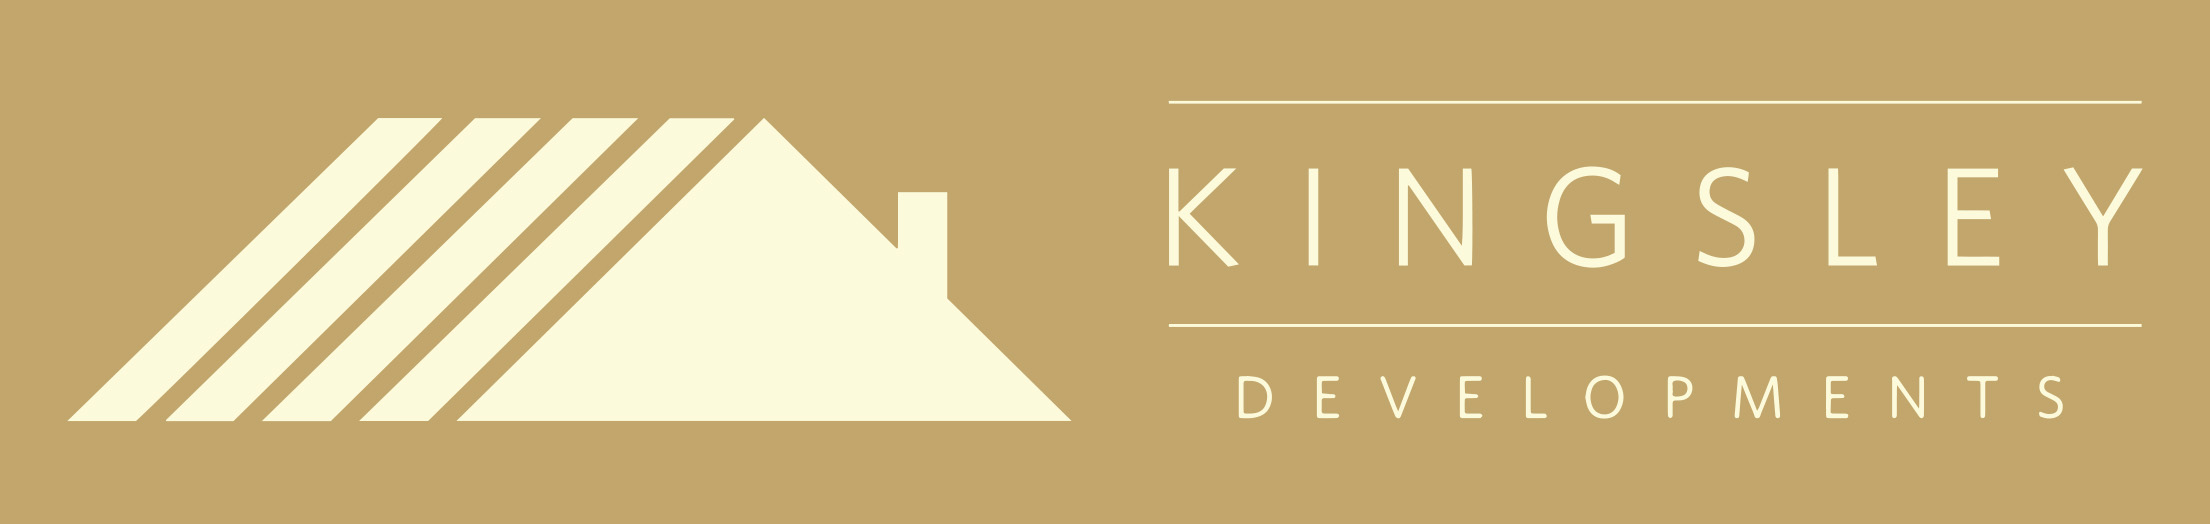 Kingsley Developments Logo Stepping Out